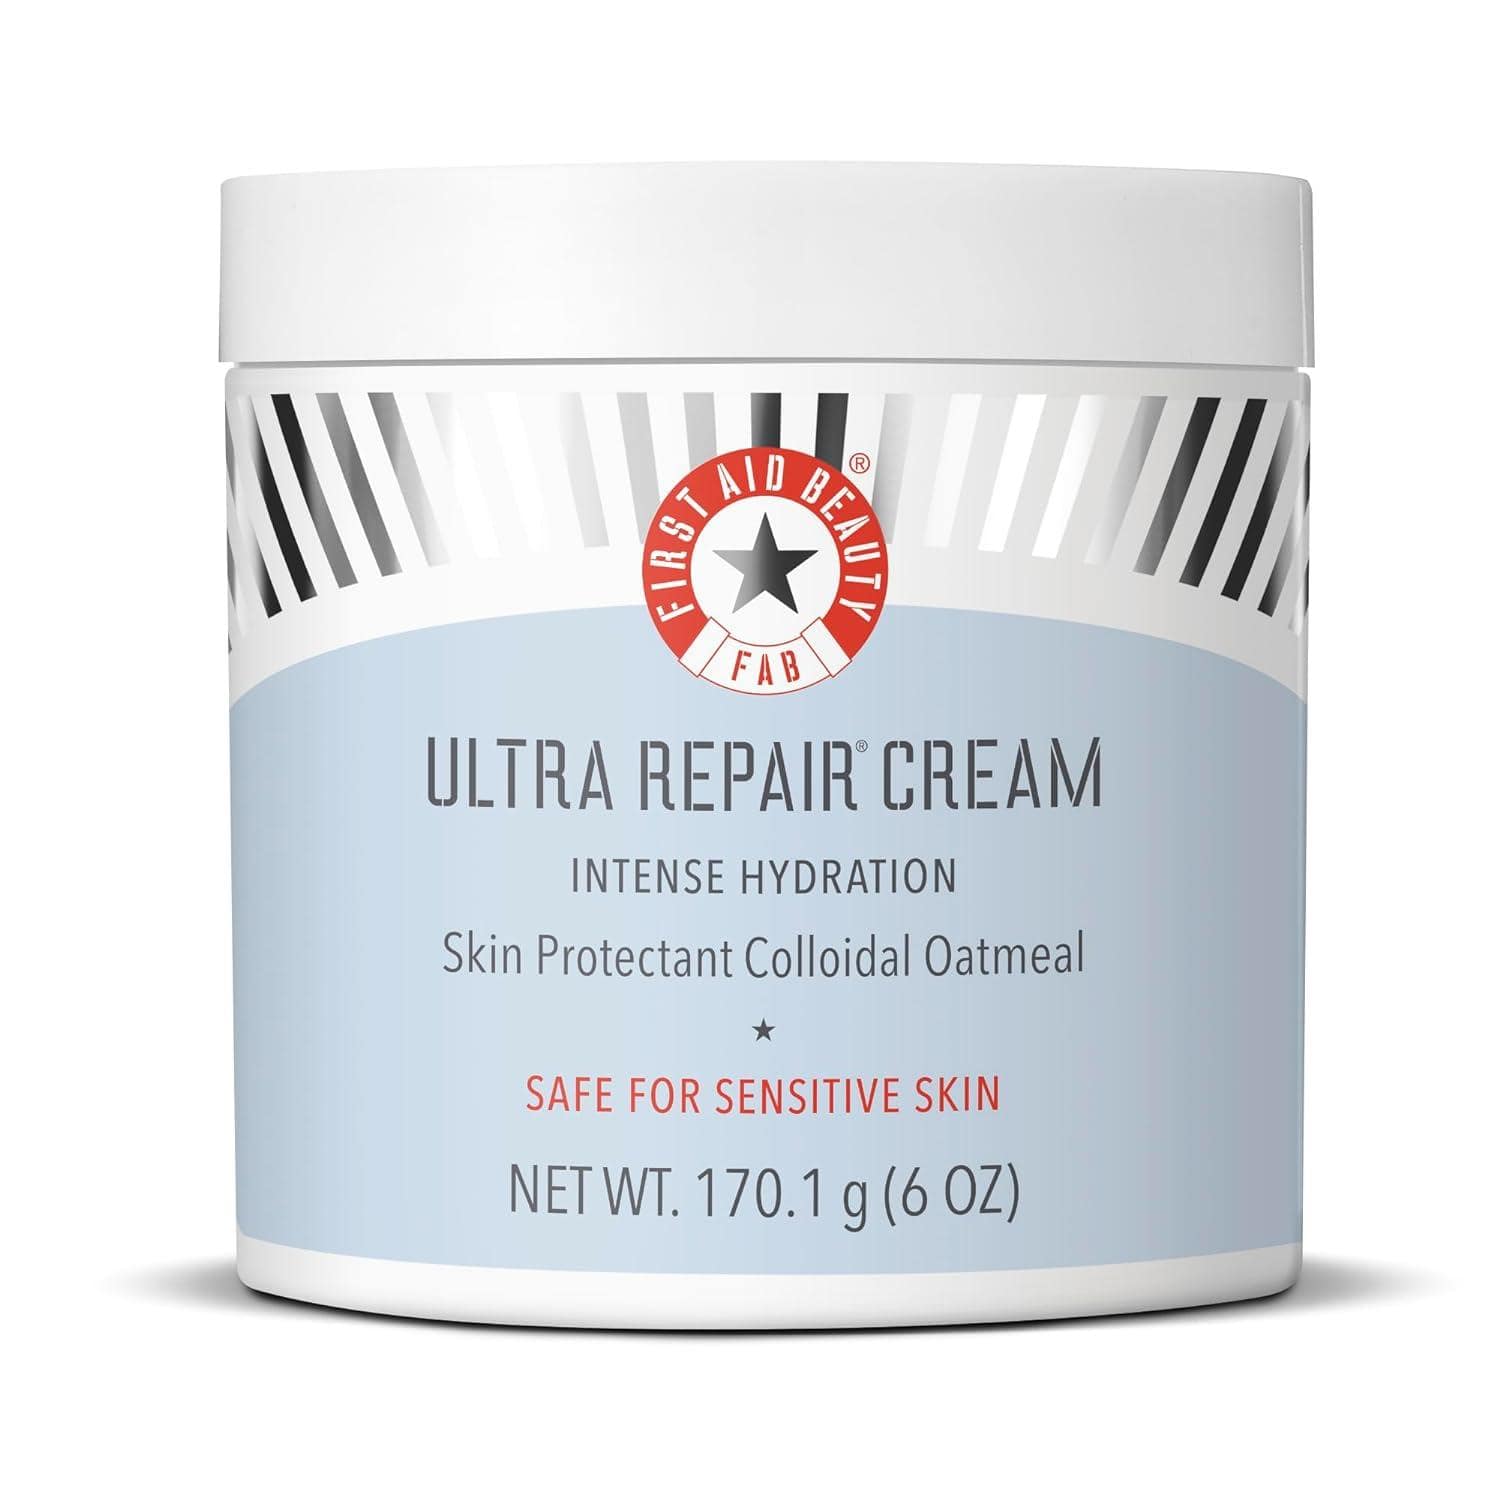 First Aid Beauty's Ultra Repair Cream-Your Instant Relief Moisturizer for Dry and Flaky Winter Skin, Ideal for Mature Skin.